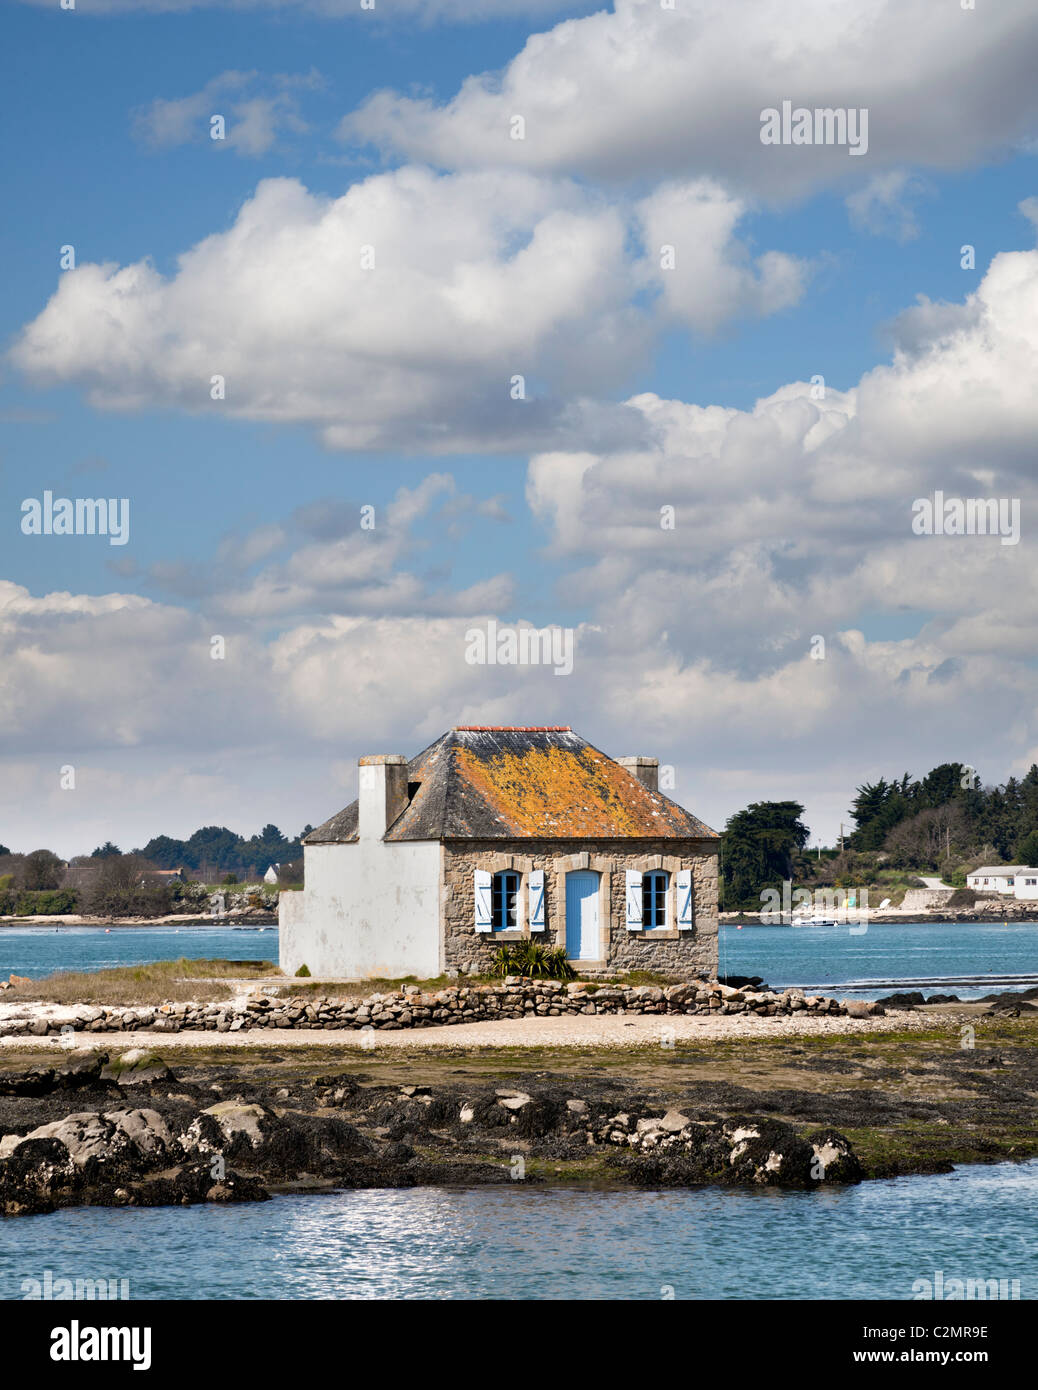 Unusual small fisherman's cottage on an island at Saint Cado, Morbihan, Brittany, France, Europe Stock Photo